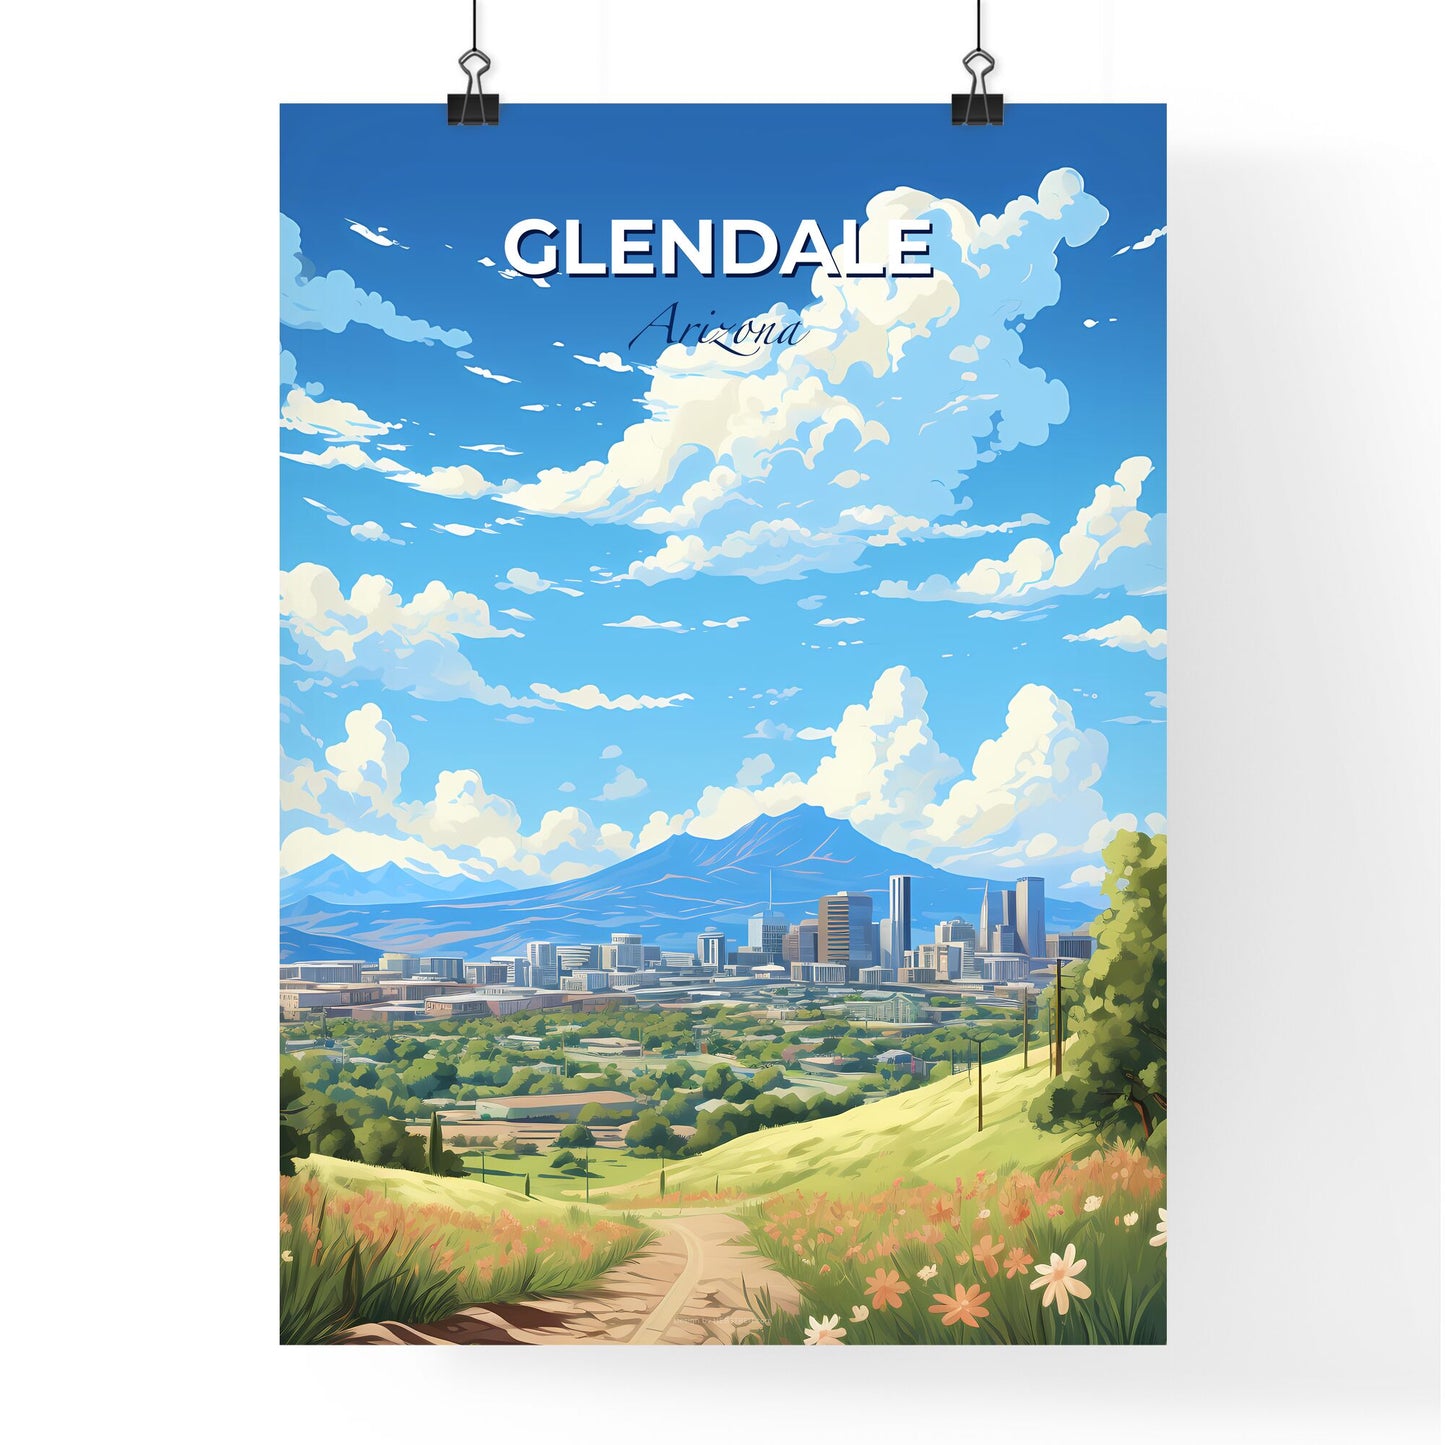 Glendale Arizona Skyline - A Landscape Of A City With A Mountain In The Background - Customizable Travel Gift Default Title